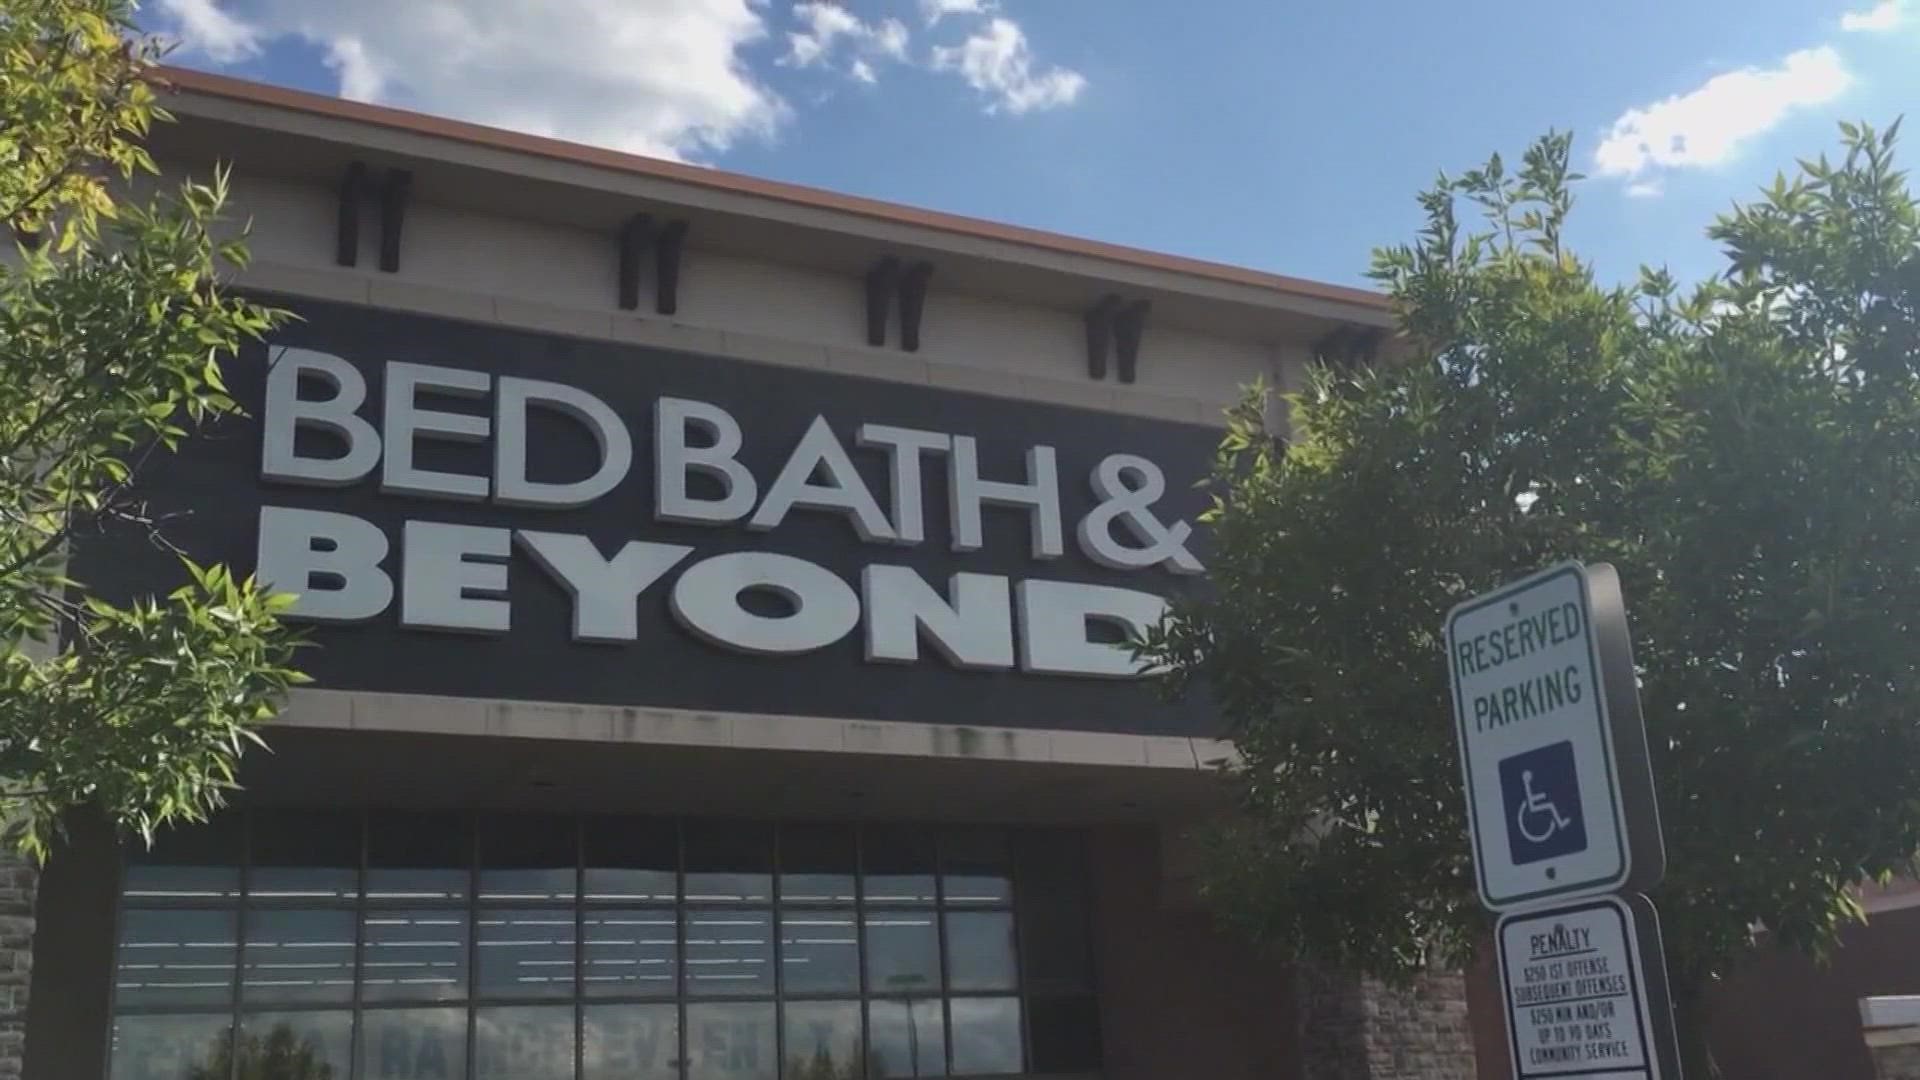 Bed Beth & Beyond says its laying off 20% of its corporate employees and is closing 150 stores.